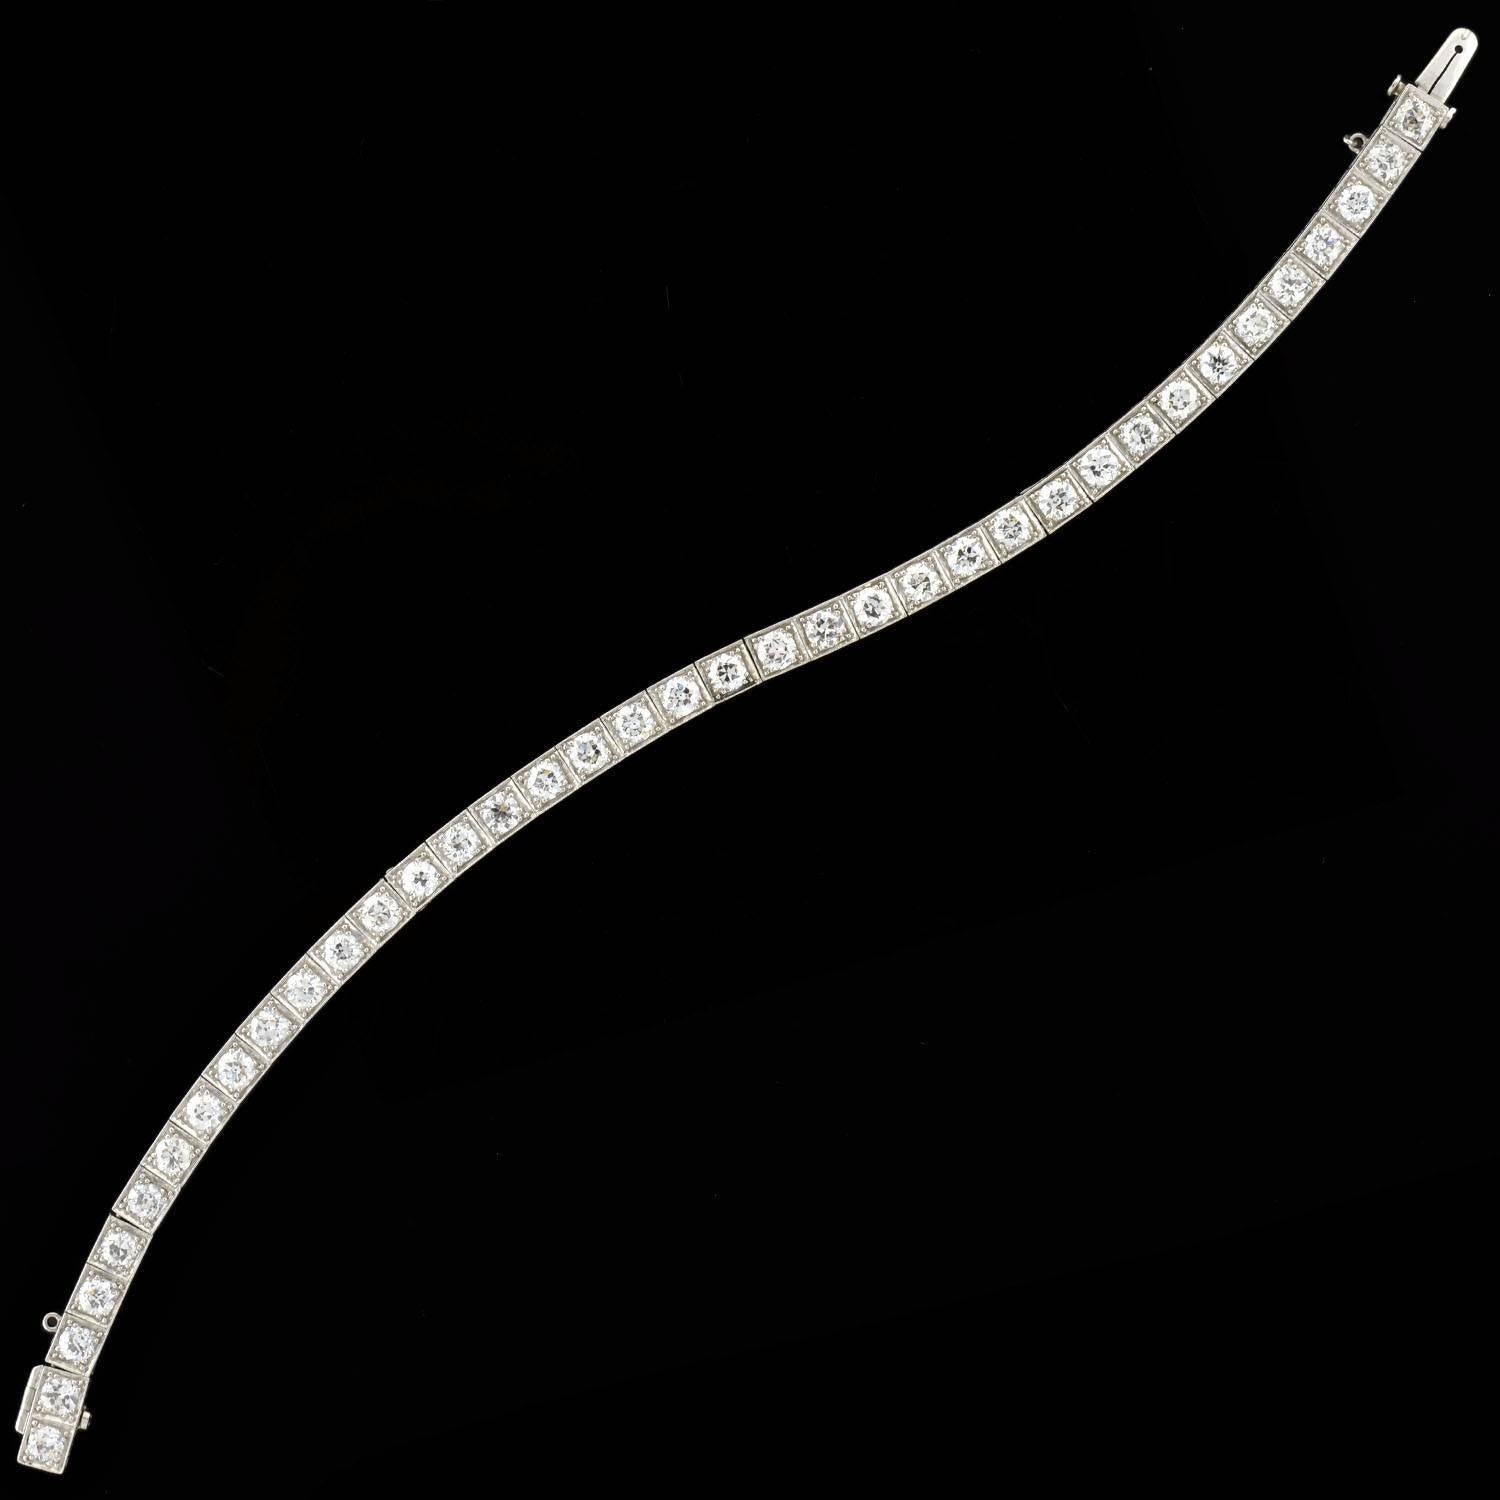 A simply stunning diamond line bracelet from the Art Deco (ca1920) era! Made of platinum, this gorgeous piece is comprised of 38 Old European Cut diamond links, which wrap around the entire length of the piece. Each sparkling diamond stone is held